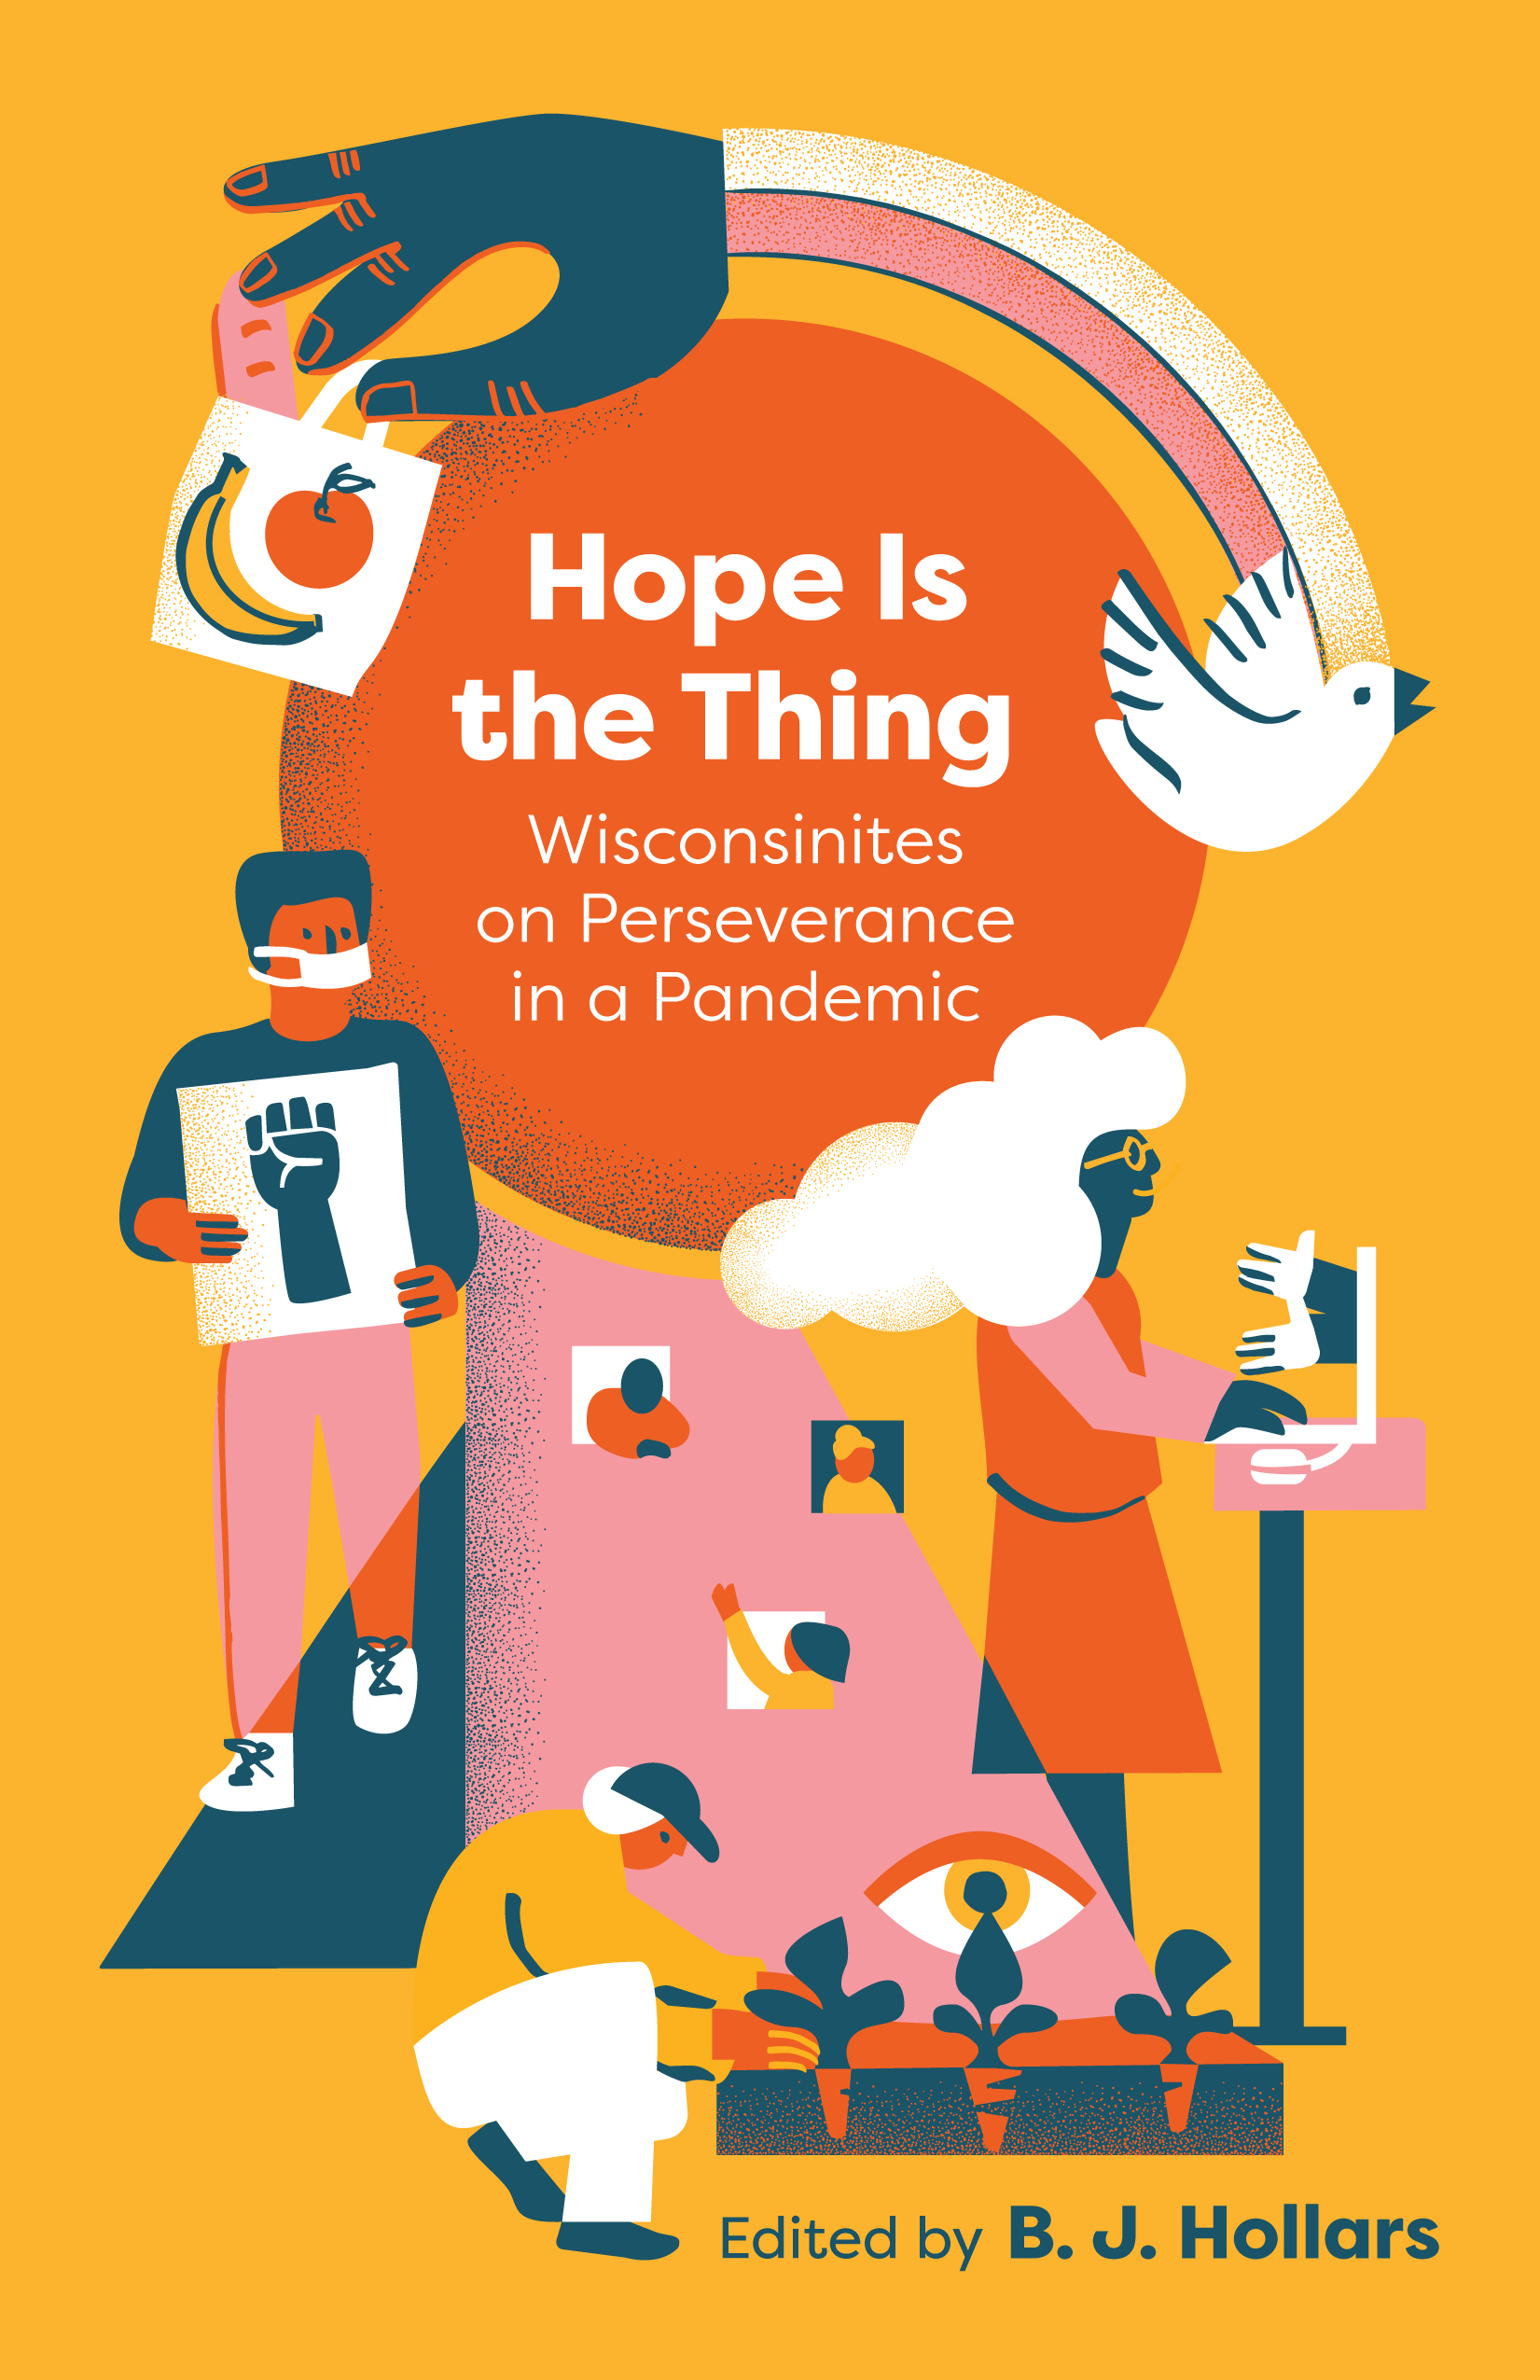 A colorful cover in tangerine orange features illustrations of people connecting and images of hope.